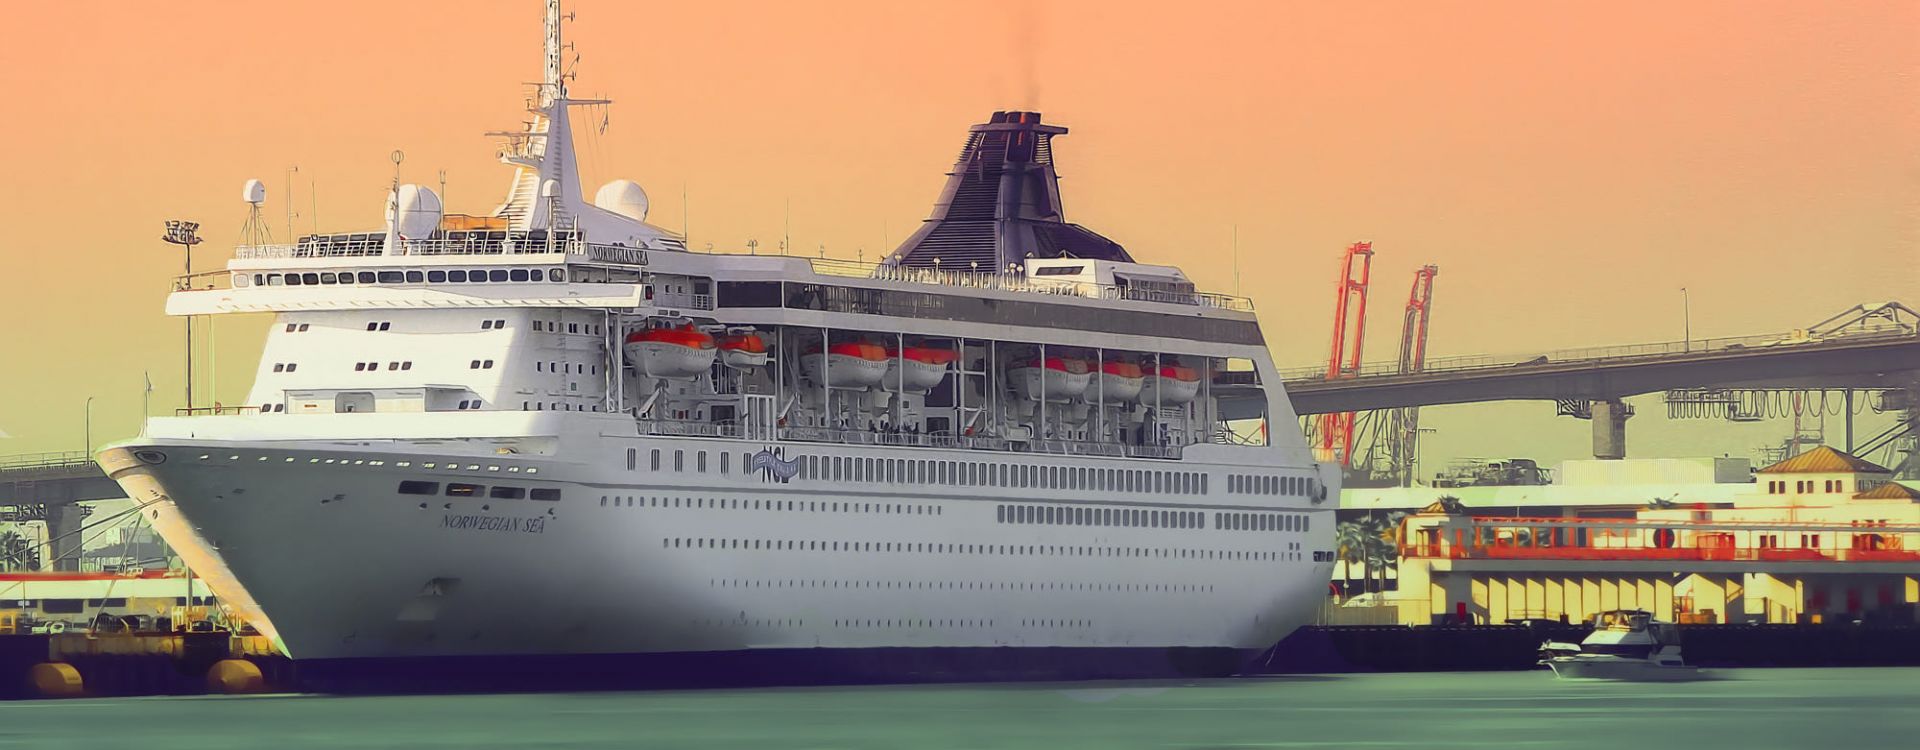 Deal: Cruise + Hotel